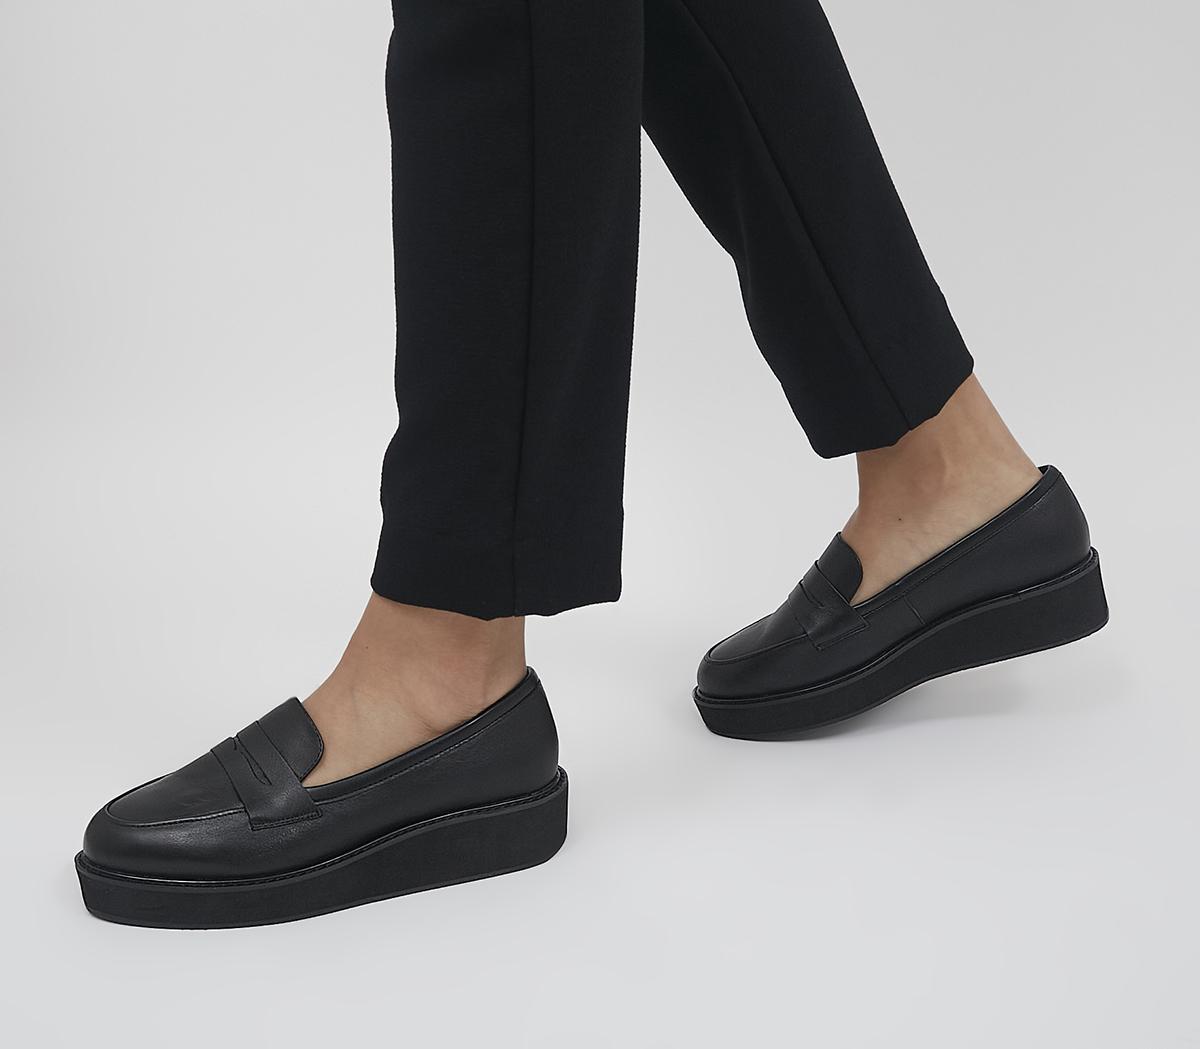 Flash Wedged Loafers